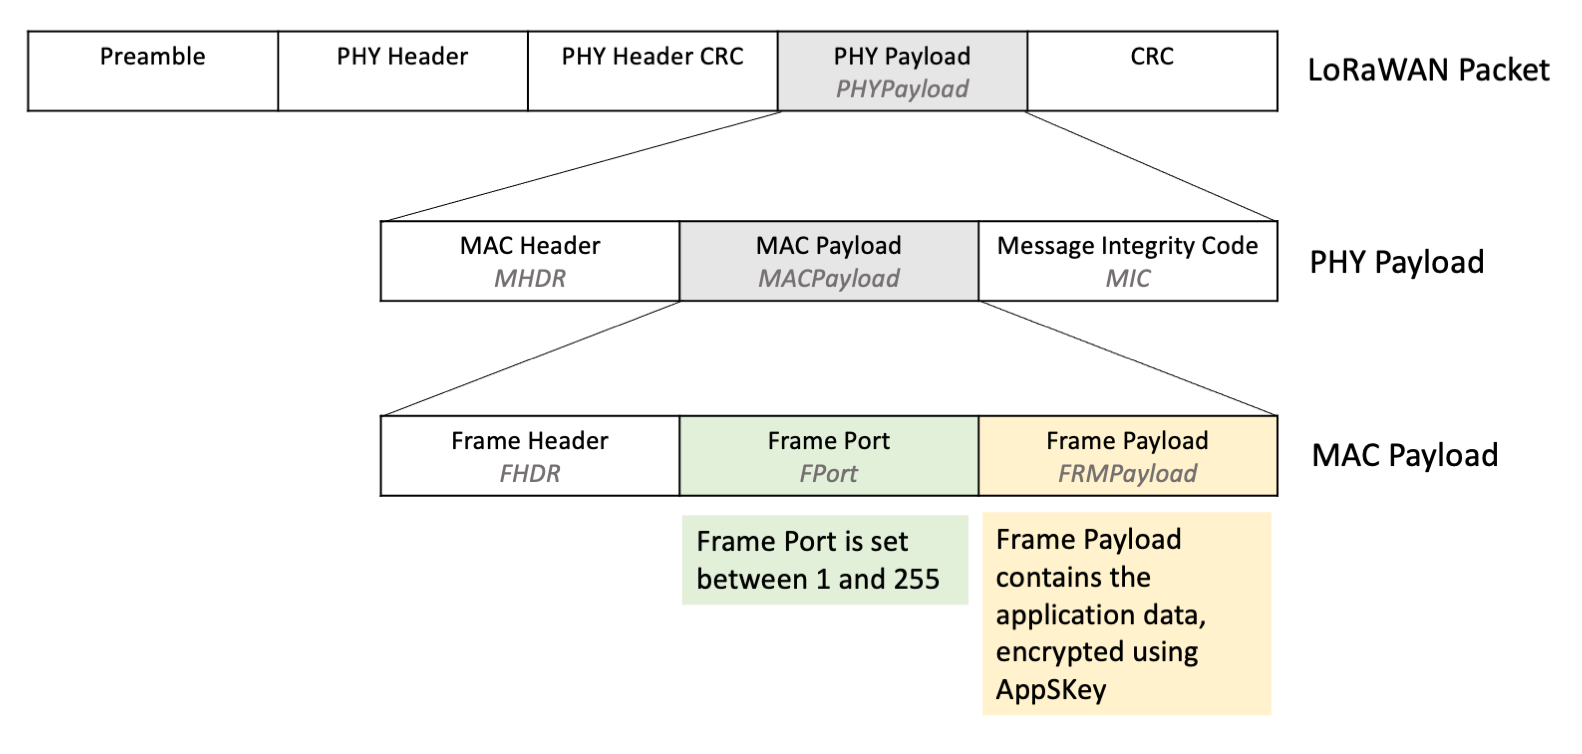 Diagram showing the Frame Port set between 1 and 255 and the Frame Payload in the MAC Payload